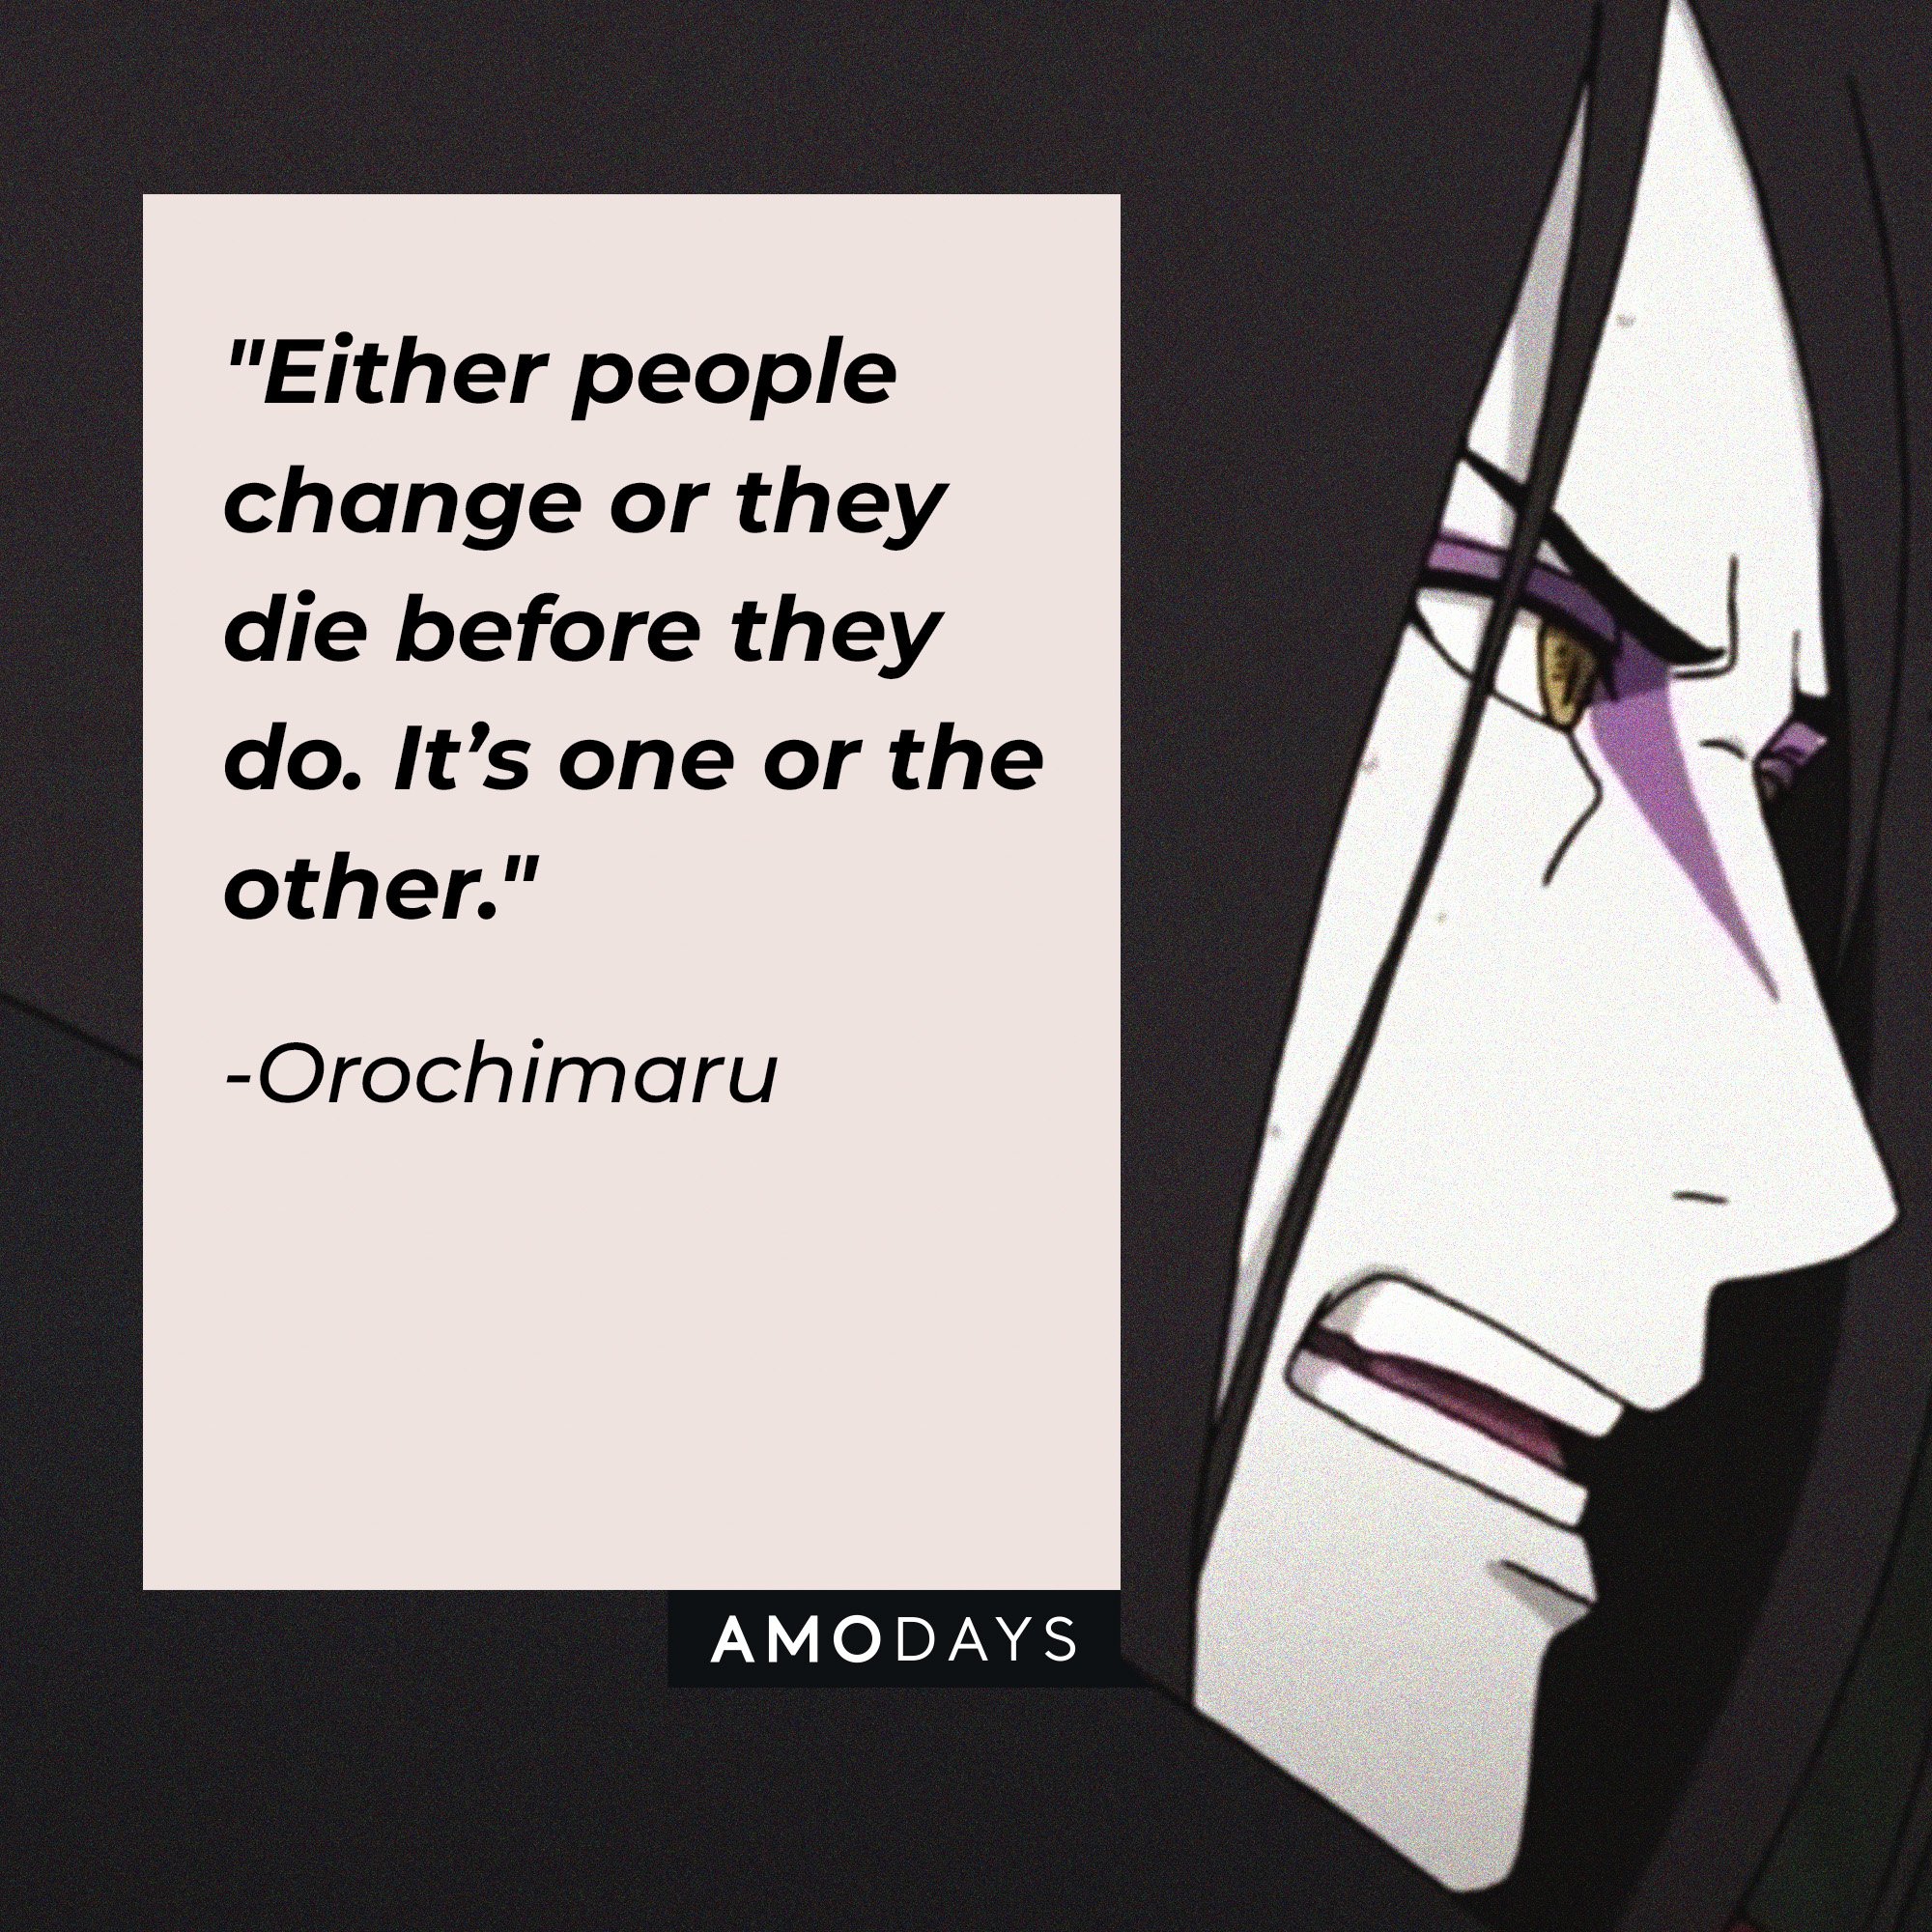 Orochimaru's quote: "Either people change or they die before they do. It’s one or the other." | Image: AmoDays